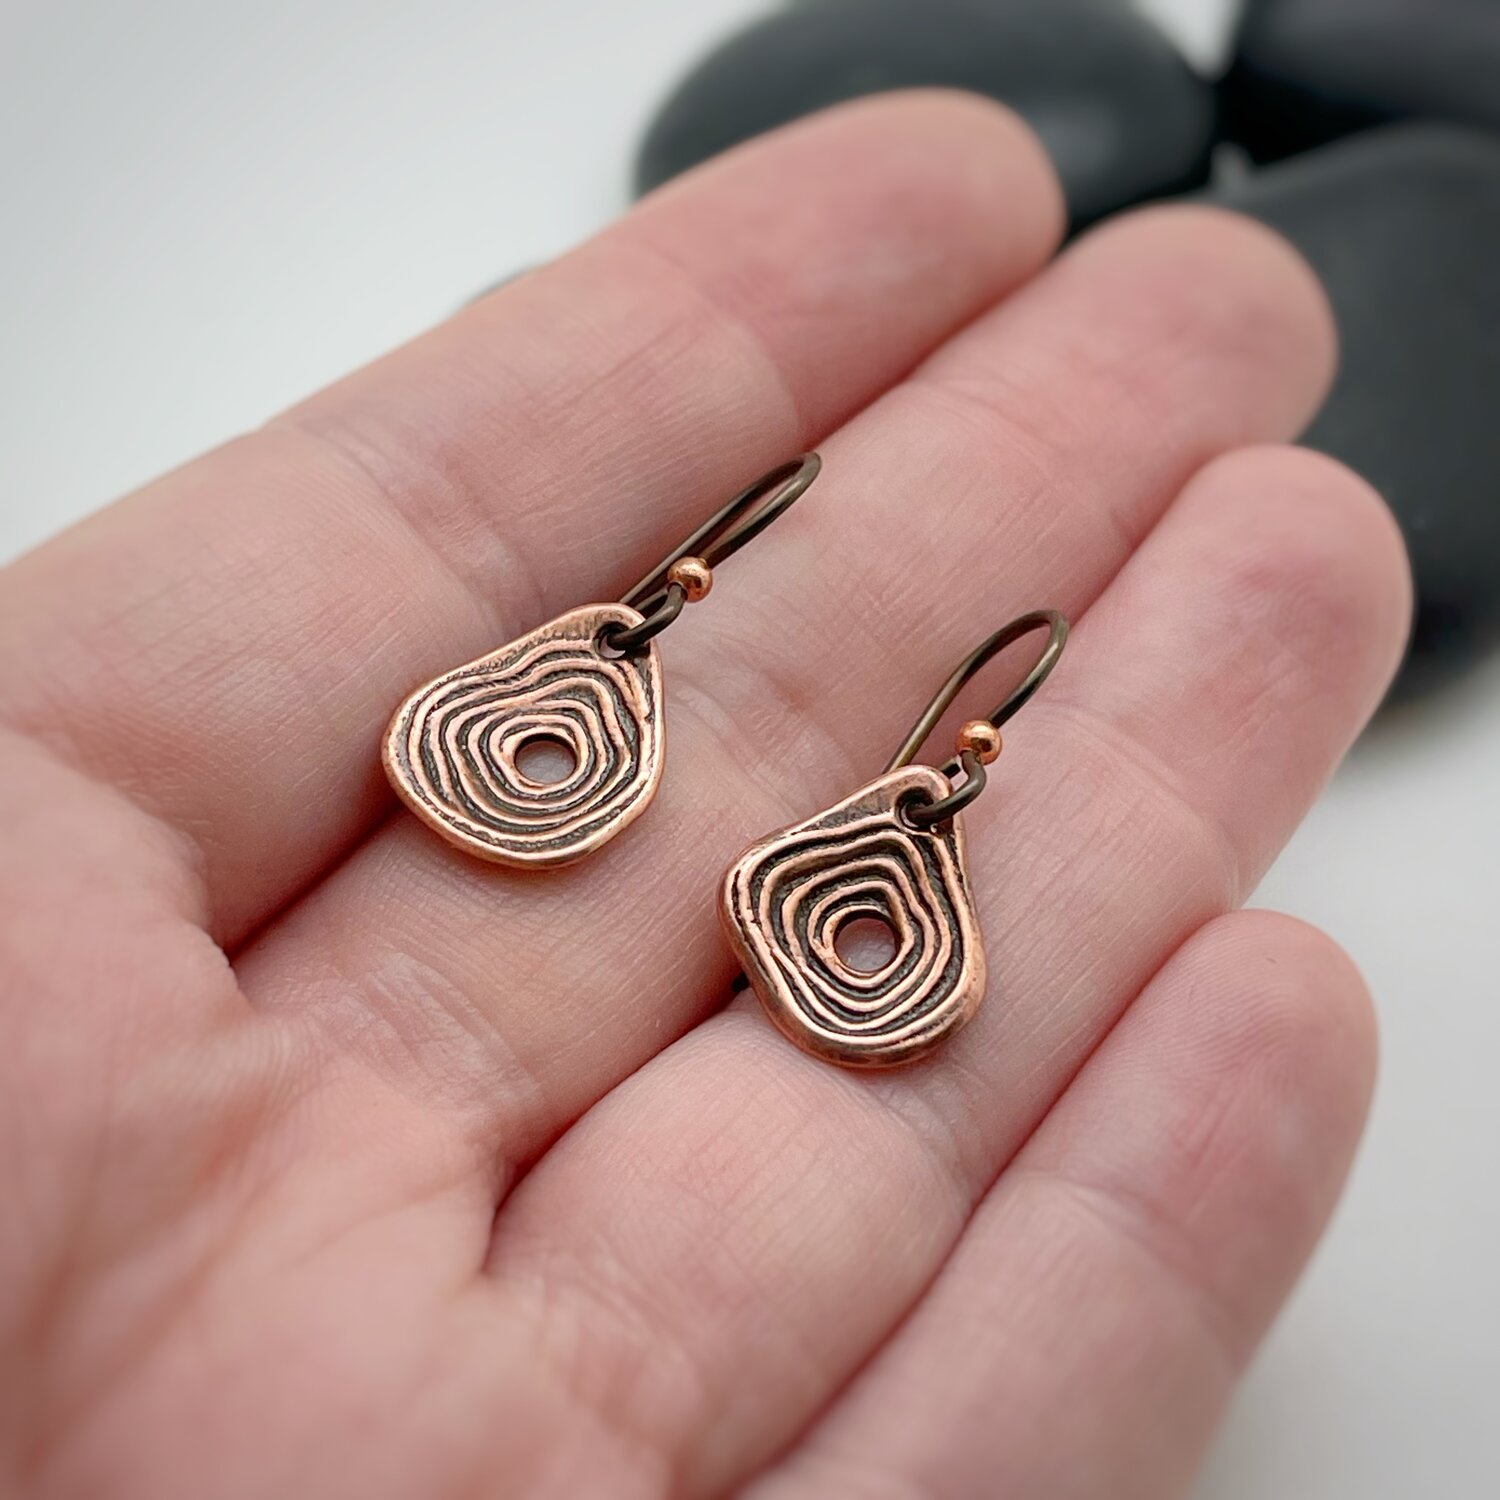 Tiny Copper Tree Ring Dangle Earrings, Handmade — Centering Pendants for  Meditation and Mindfulness